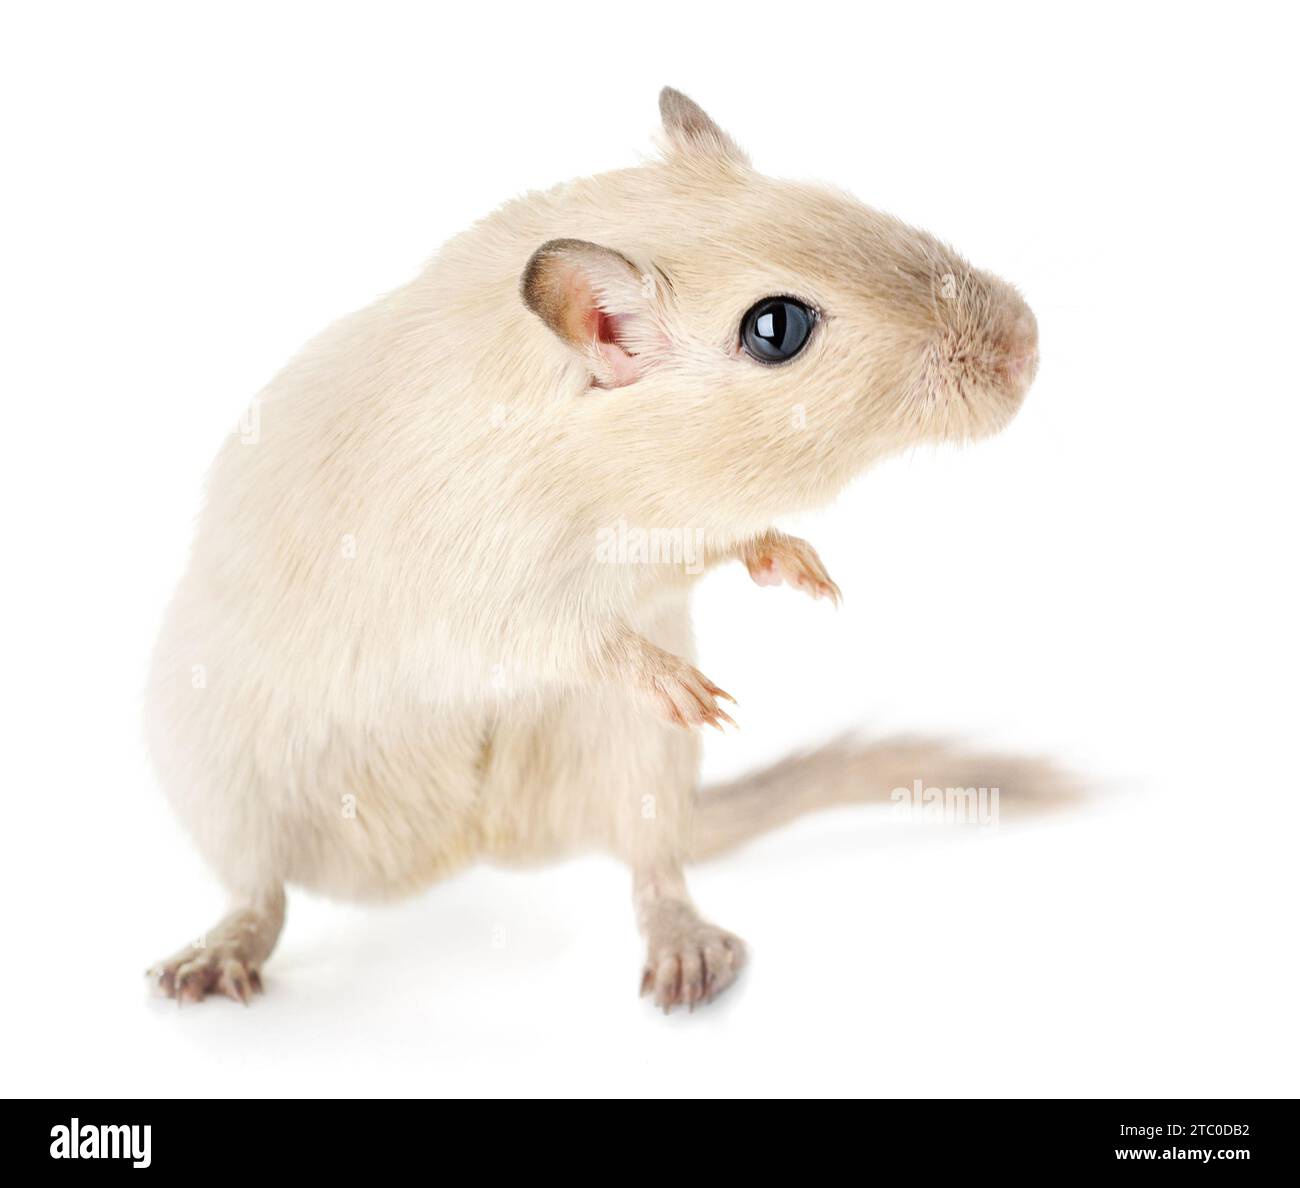 Alert and curious pet gerbil in a dynamic funny pose standing on its hind legs isolated on white background Stock Photo